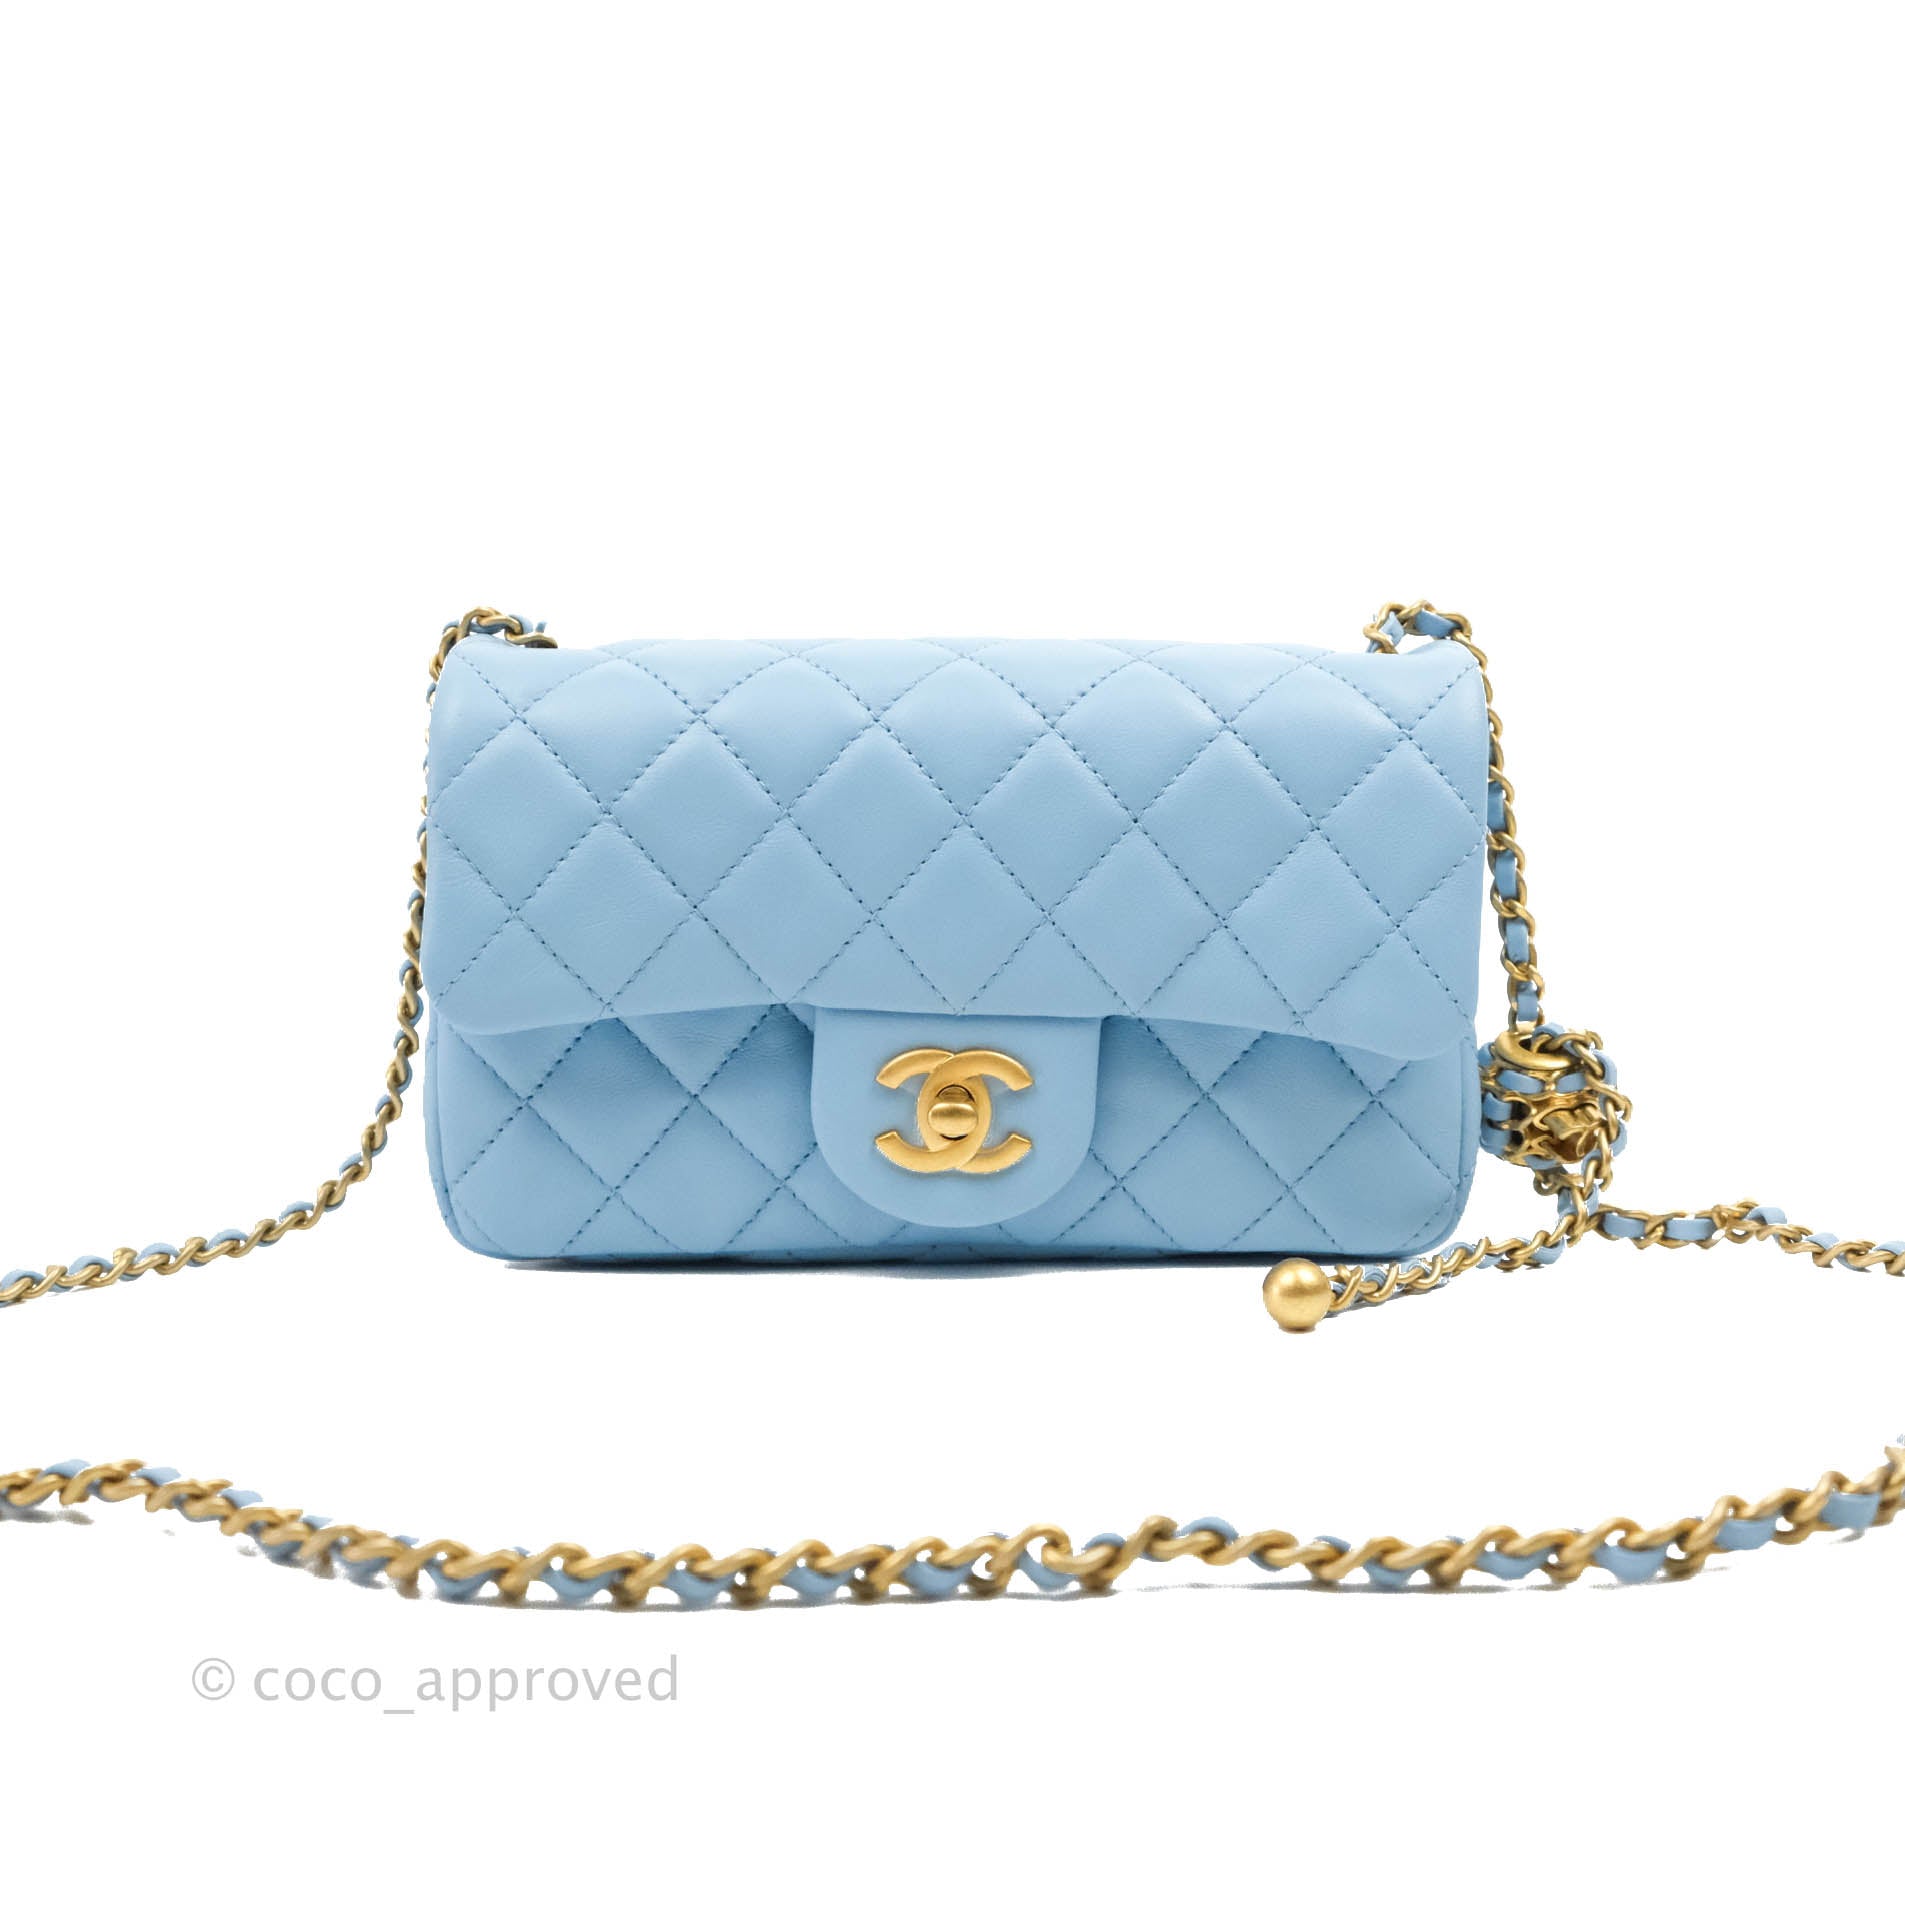 D' Borse Boutique - Chanel Pearl Crush Mini Rectangular Flap Bag In Pastel  Blue Lambskin With GHW Condition : BRAND NEW! www.wasap.my/60164553444  Wechat : tommydborse Location : 25 Lorong Bangkok,Pulau Tikus,10250  Georgetown